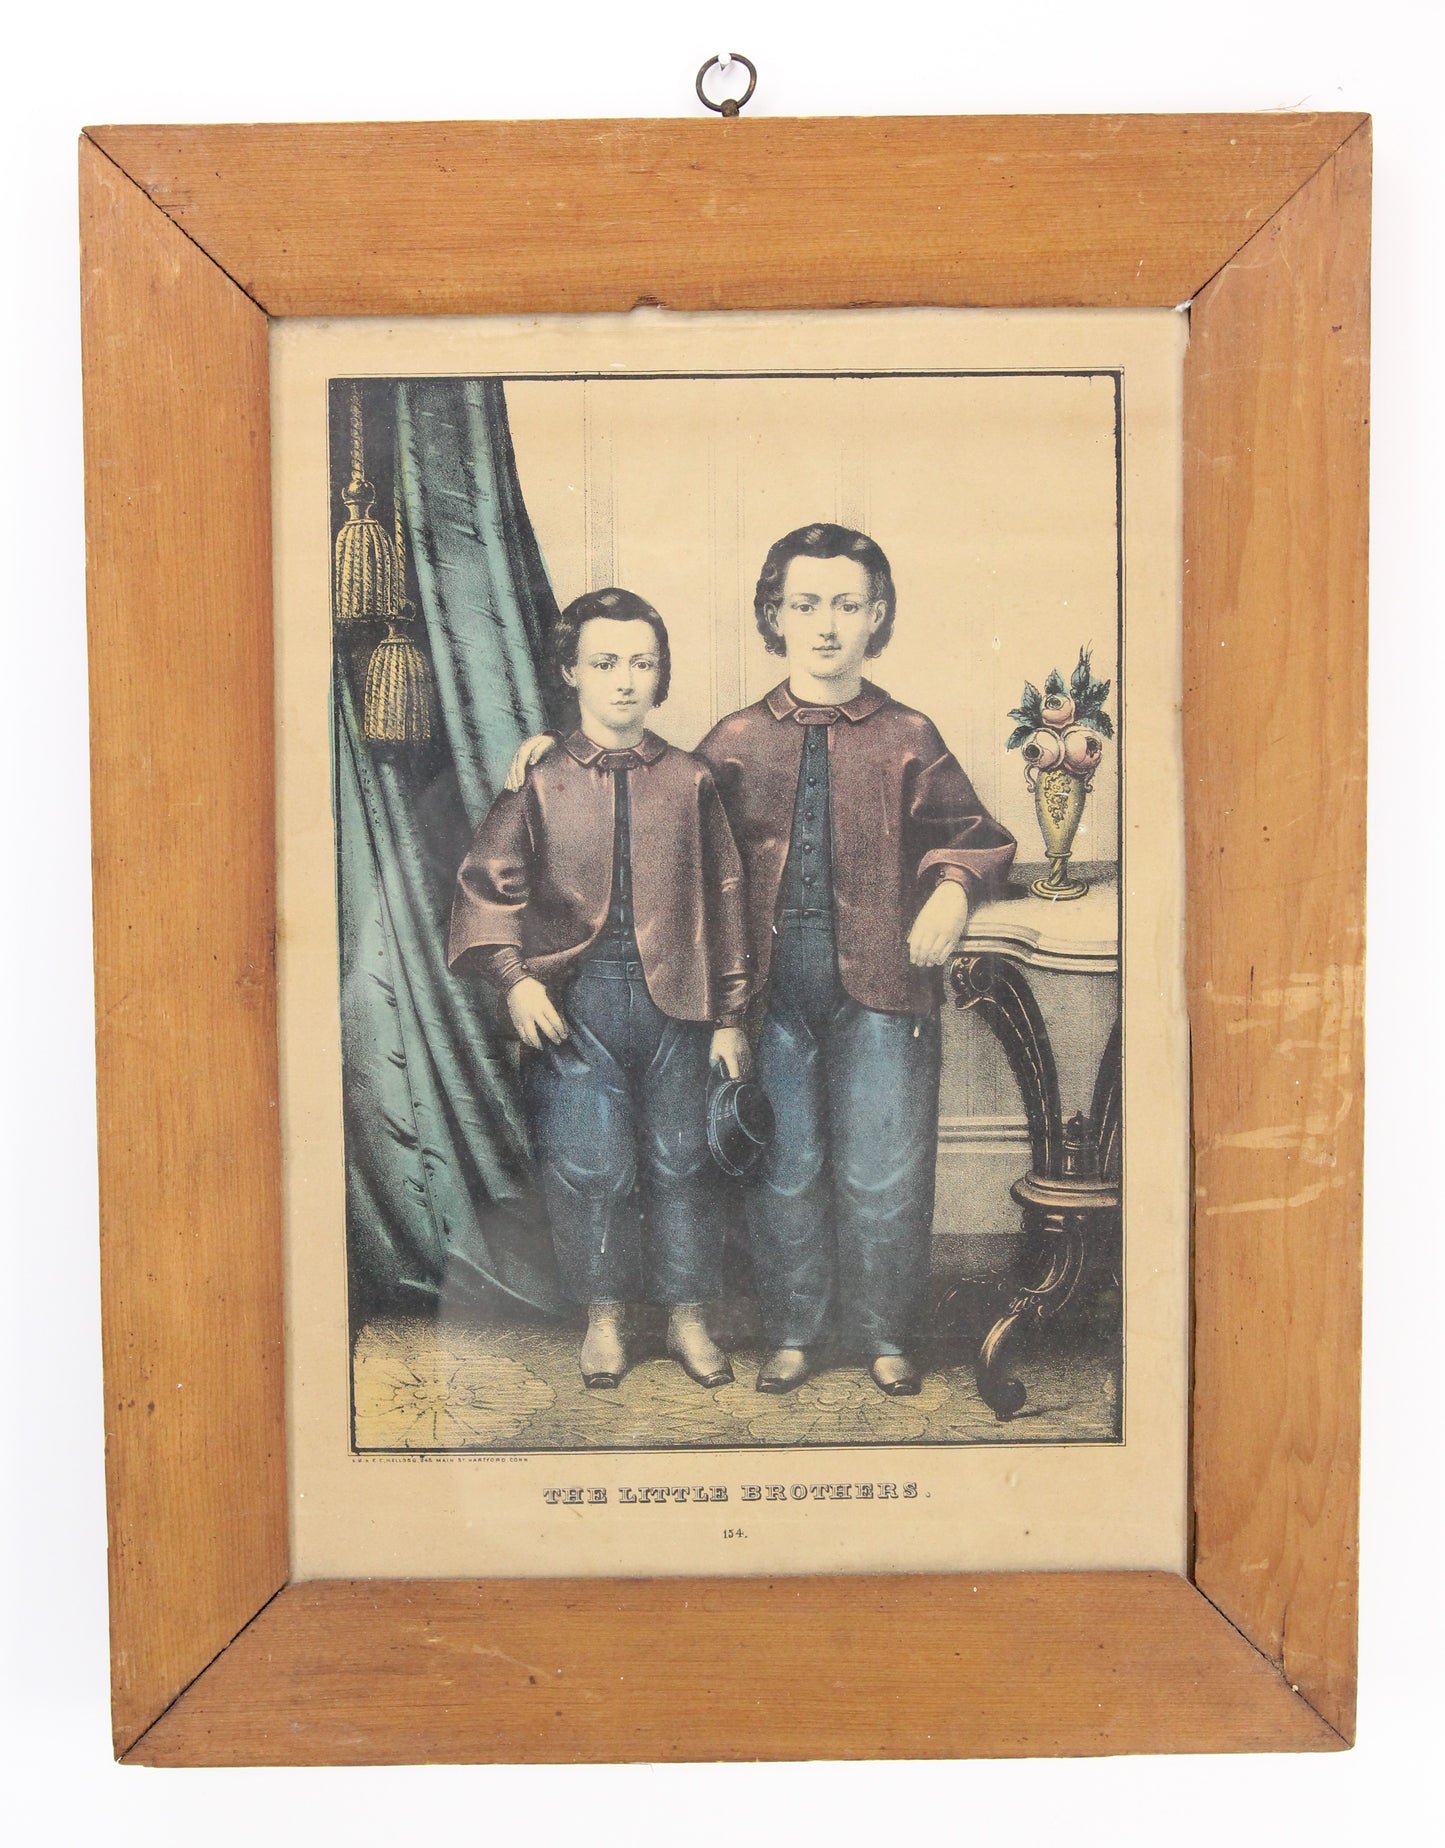 Framed Kellogg Brothers Lithograph Print "The Little Brothers" - 13.5 x 17.5"